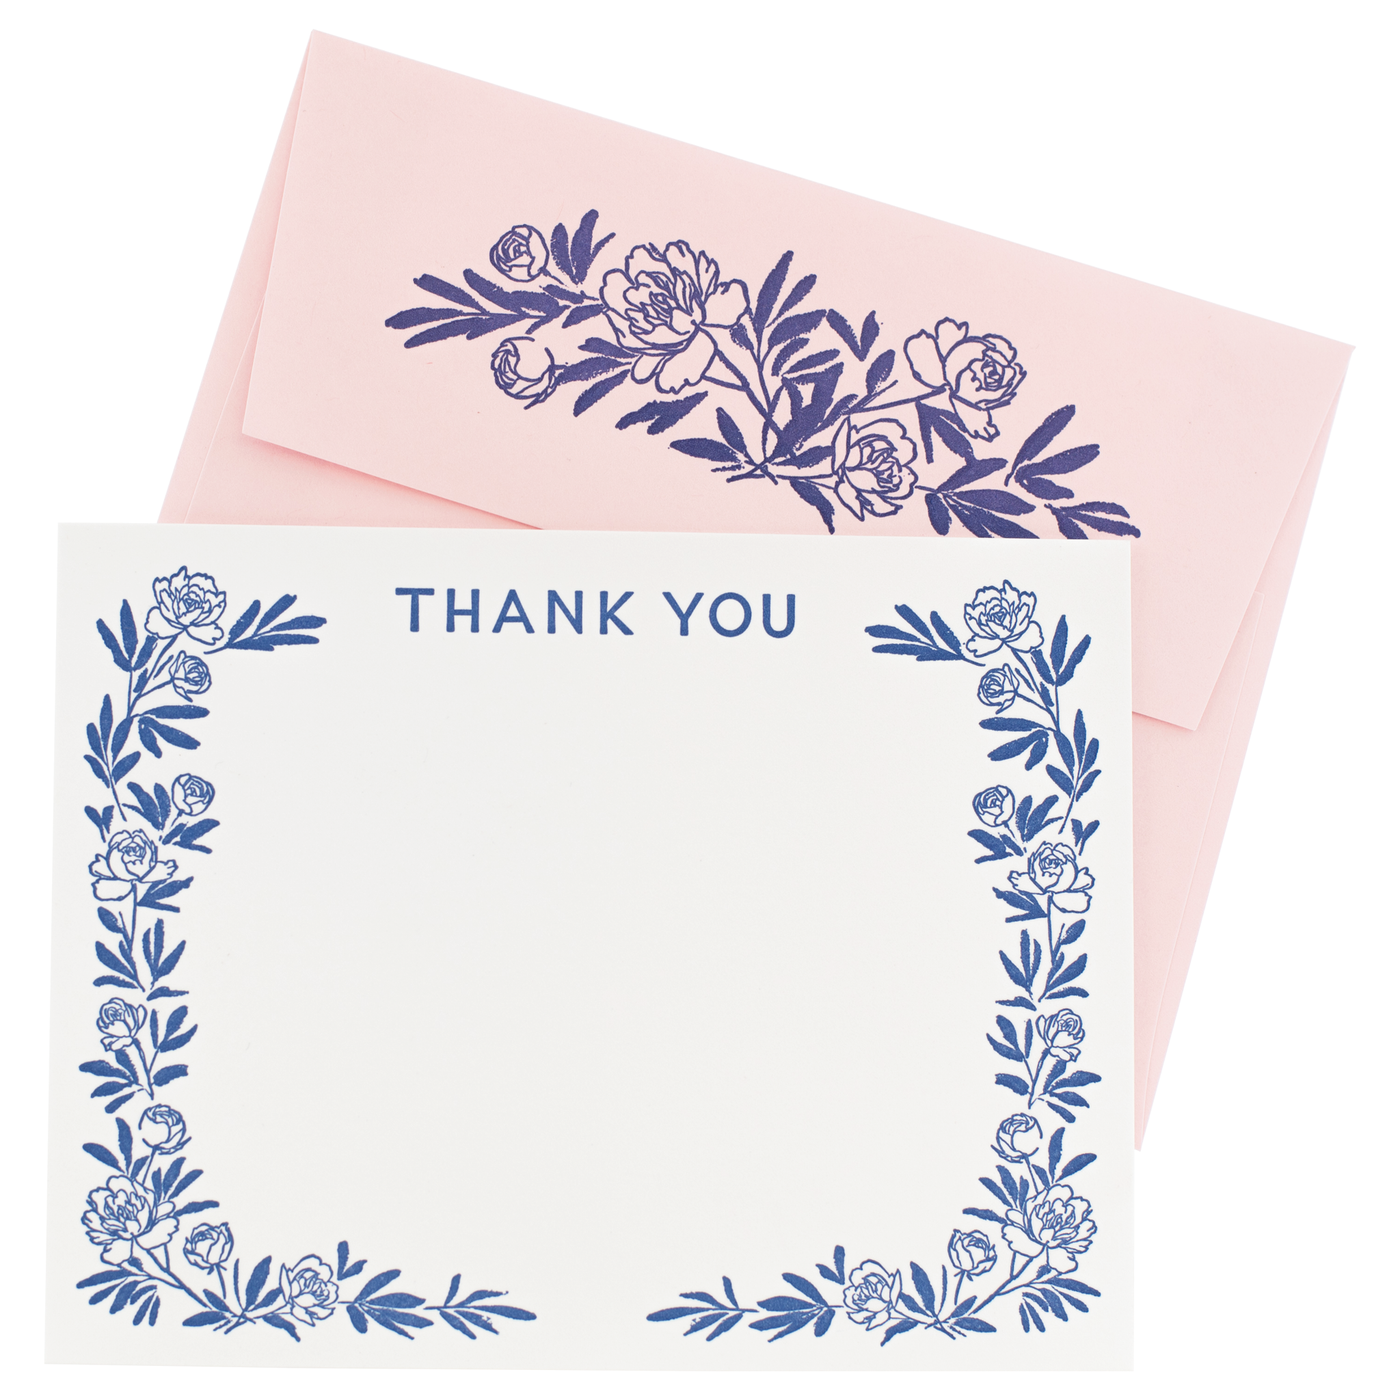 Smudge Ink - Peony Note Cards with Letterpress Envelopes